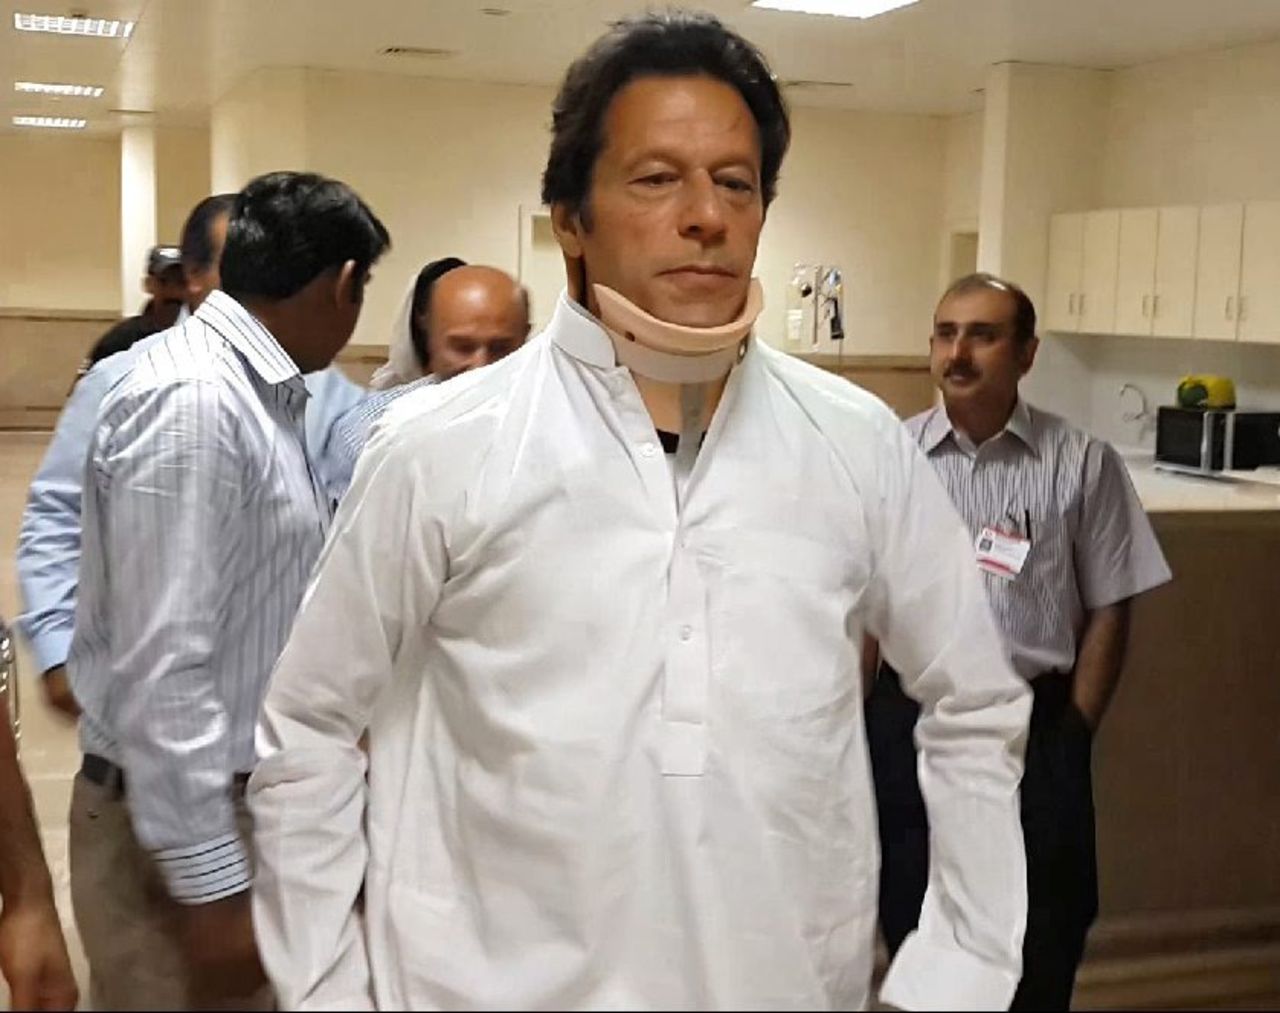 Imran Khan, head of Pakistan's Tehreek-e-Insaf party, leaves the hospital in Lahore, Pakistan, on Wednesday, May 22. Khan suffered spinal fractures and a head injury when he toppled from a forklift that was raising him up to a stage as he campaigned in Lahore for elections held on May 11. Victory in the elections went to Nawaz Sharif, a two-time former prime minister, and his party, the Pakistan Muslim League.